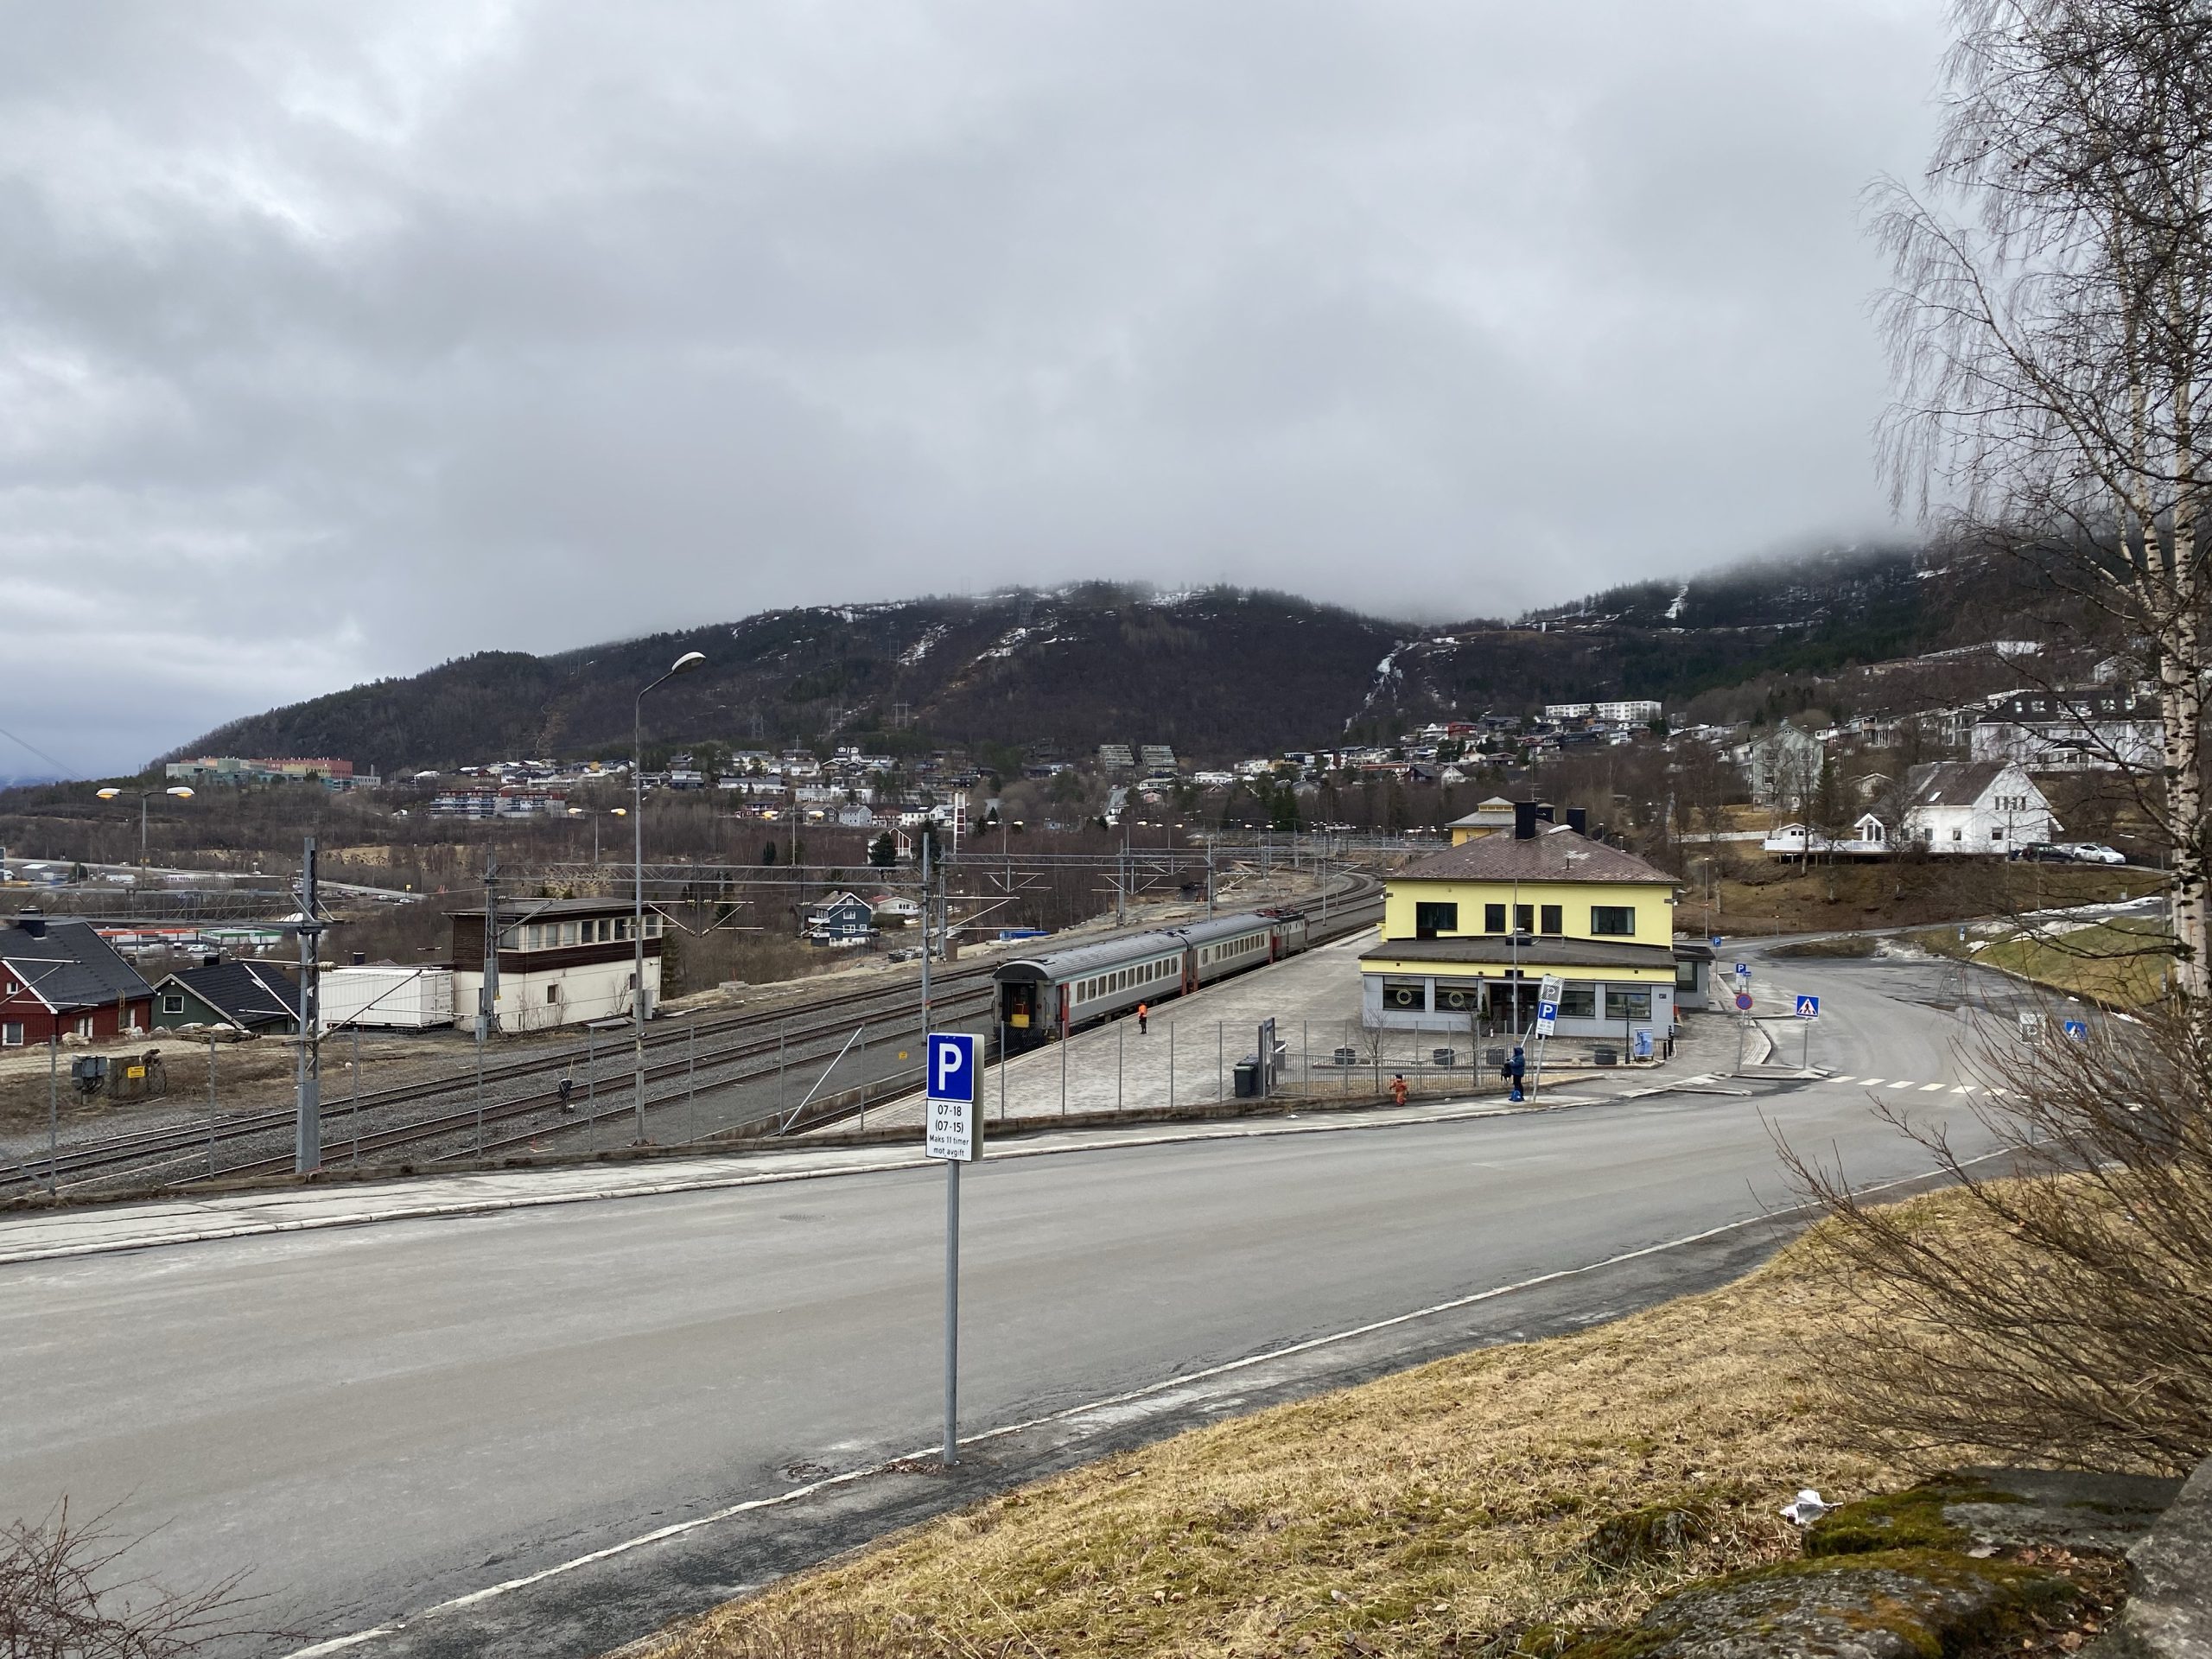 Narvik Station, with our train about to be backed up and stabled for the night